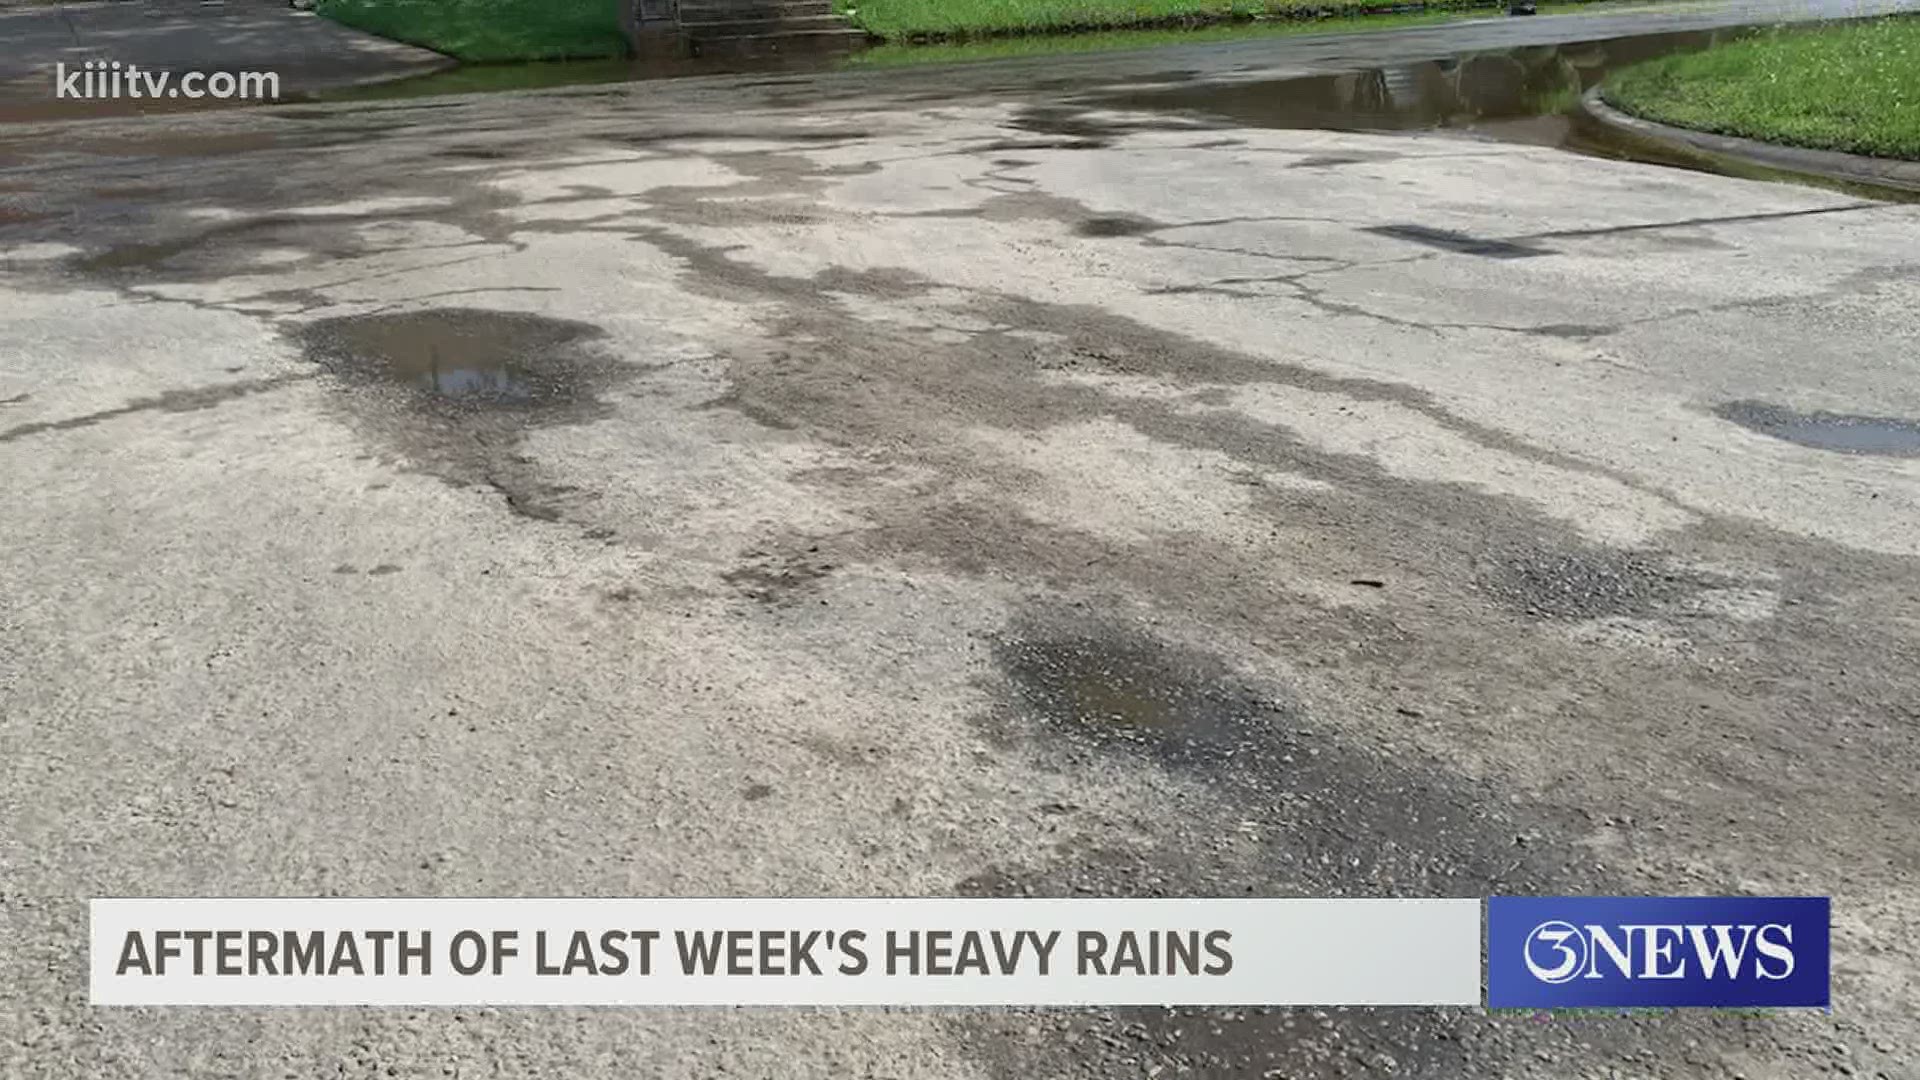 The heavy rain last week resulted in flooding across several areas in the Coastal Bend. Two of those hard hit areas include Rockport and Papalote.